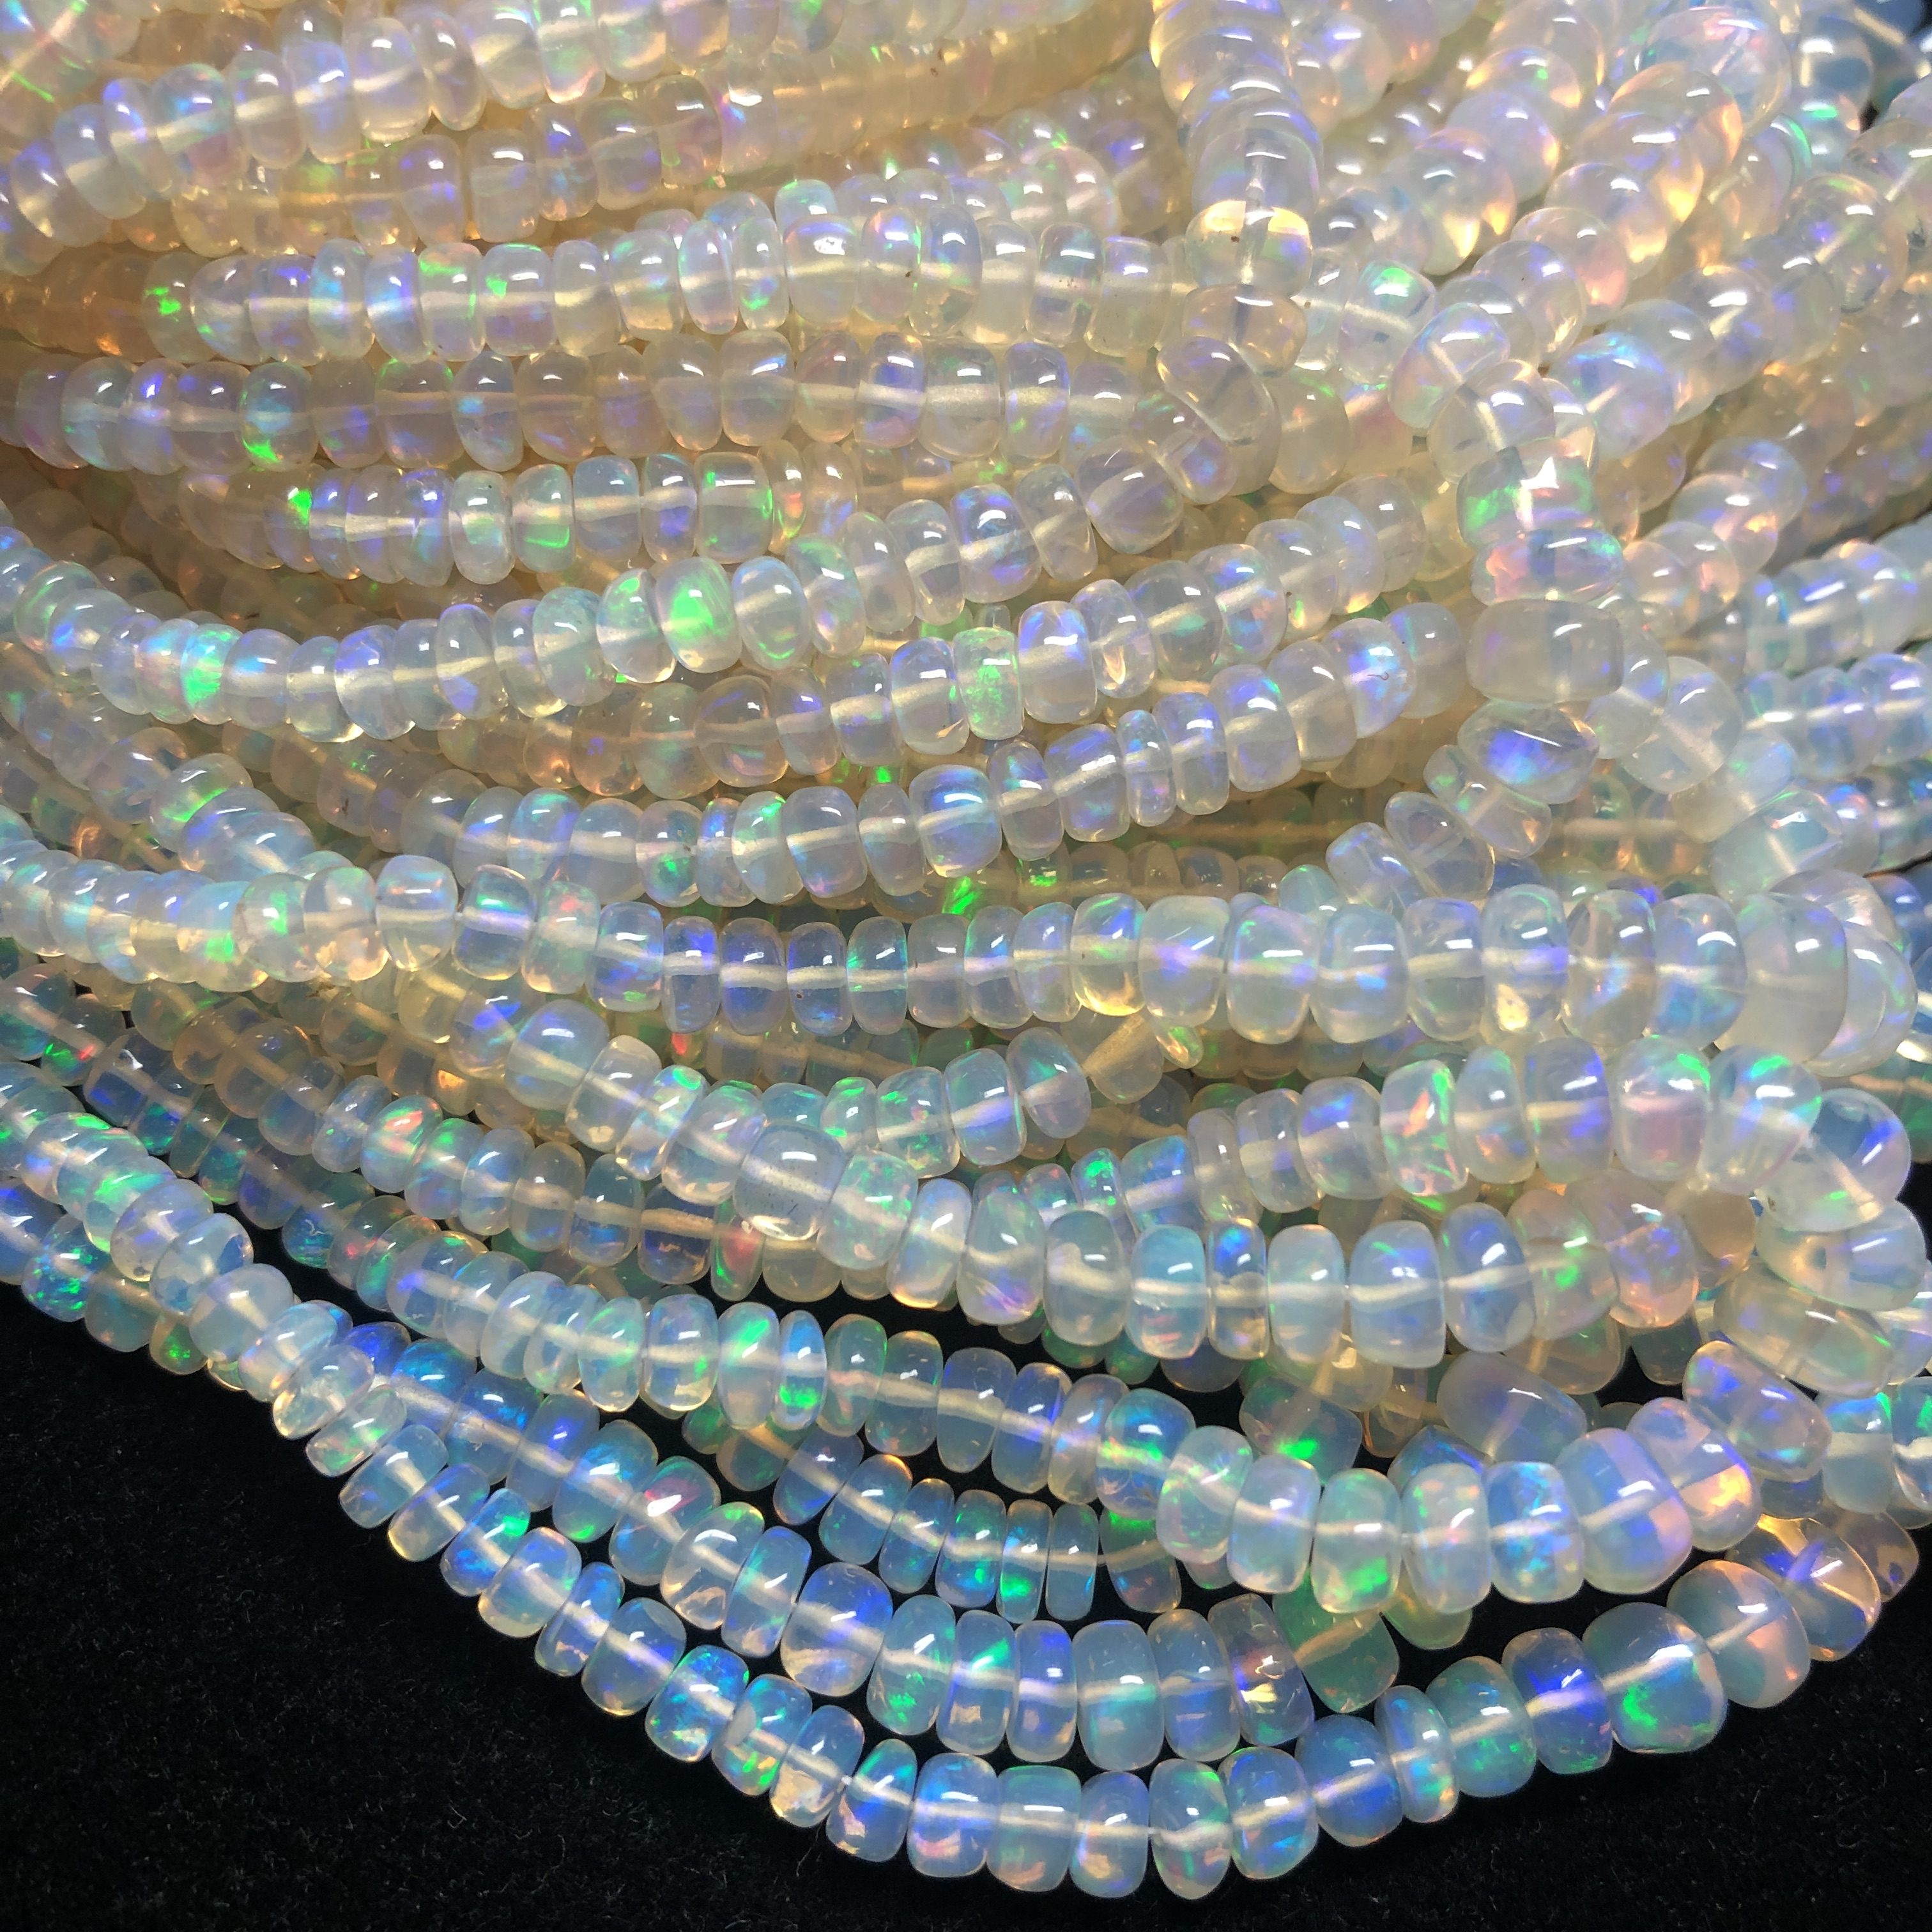 Opal Rondelle Beads Smooth Ethiopian Opal Beads Ethiopian Opal Beads Fire Welo Opal Beads 3.5-6mm Opal Plain Rondelle Beads